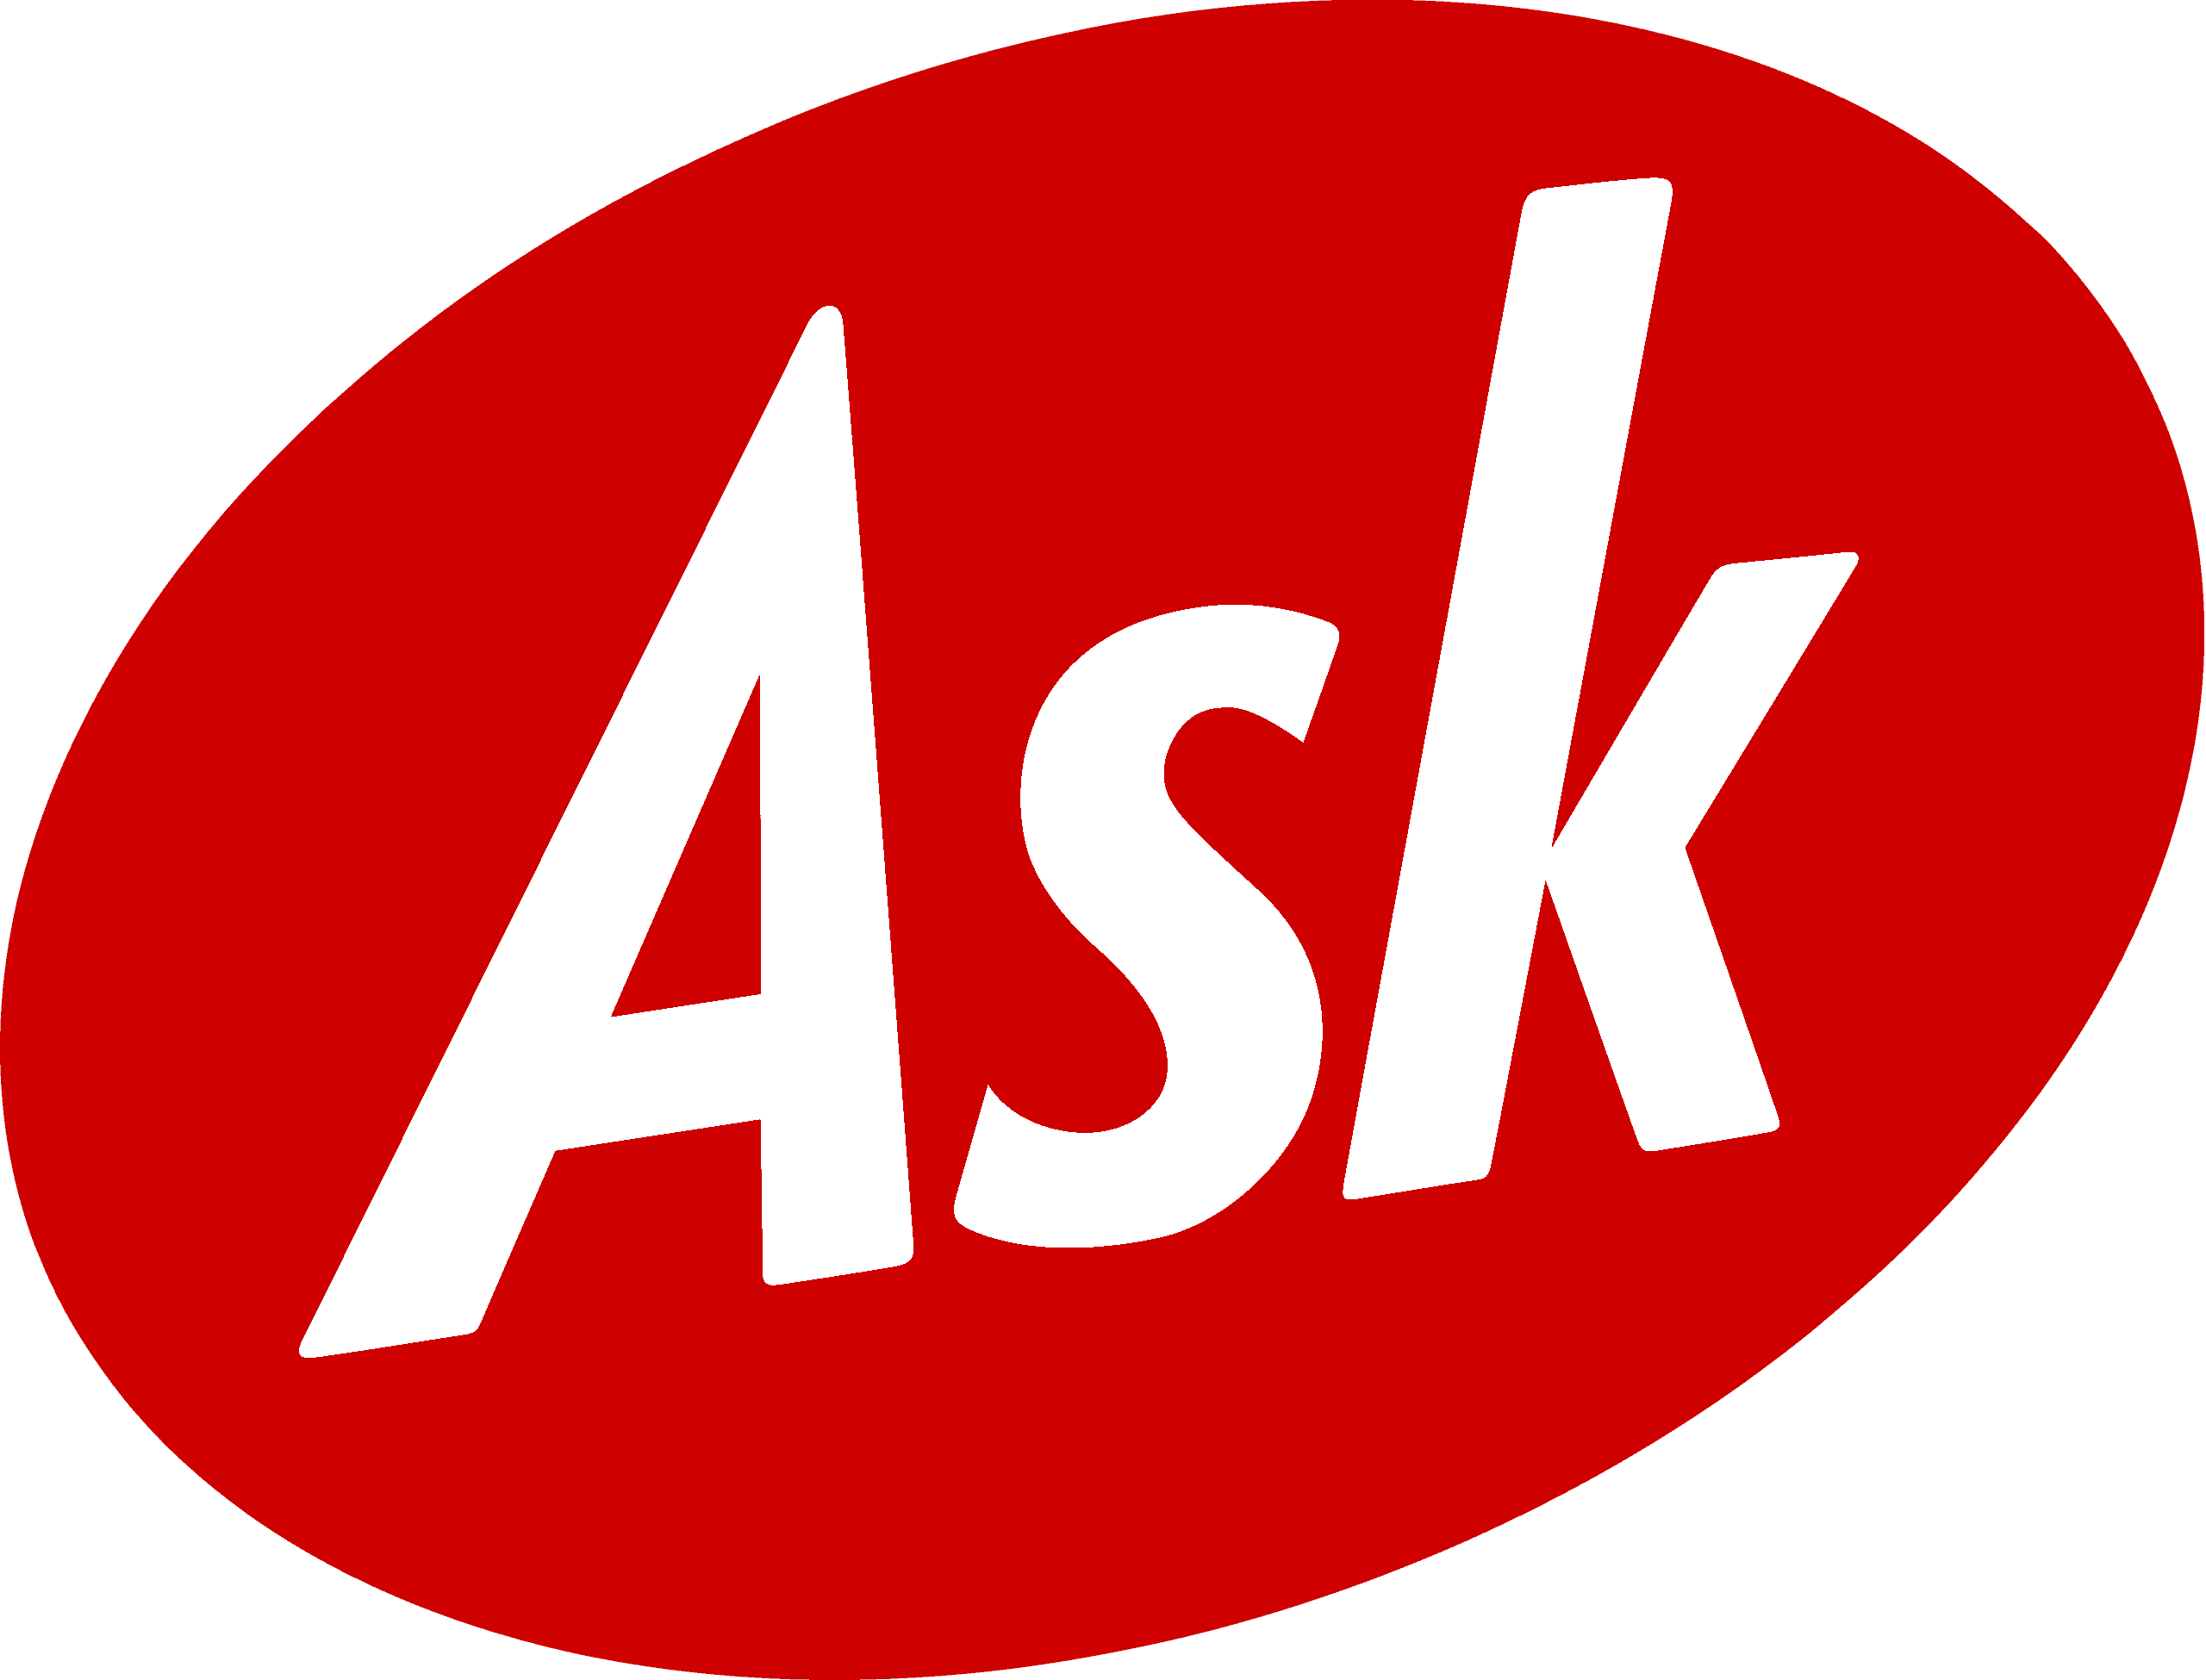 Ask logo on a gray background